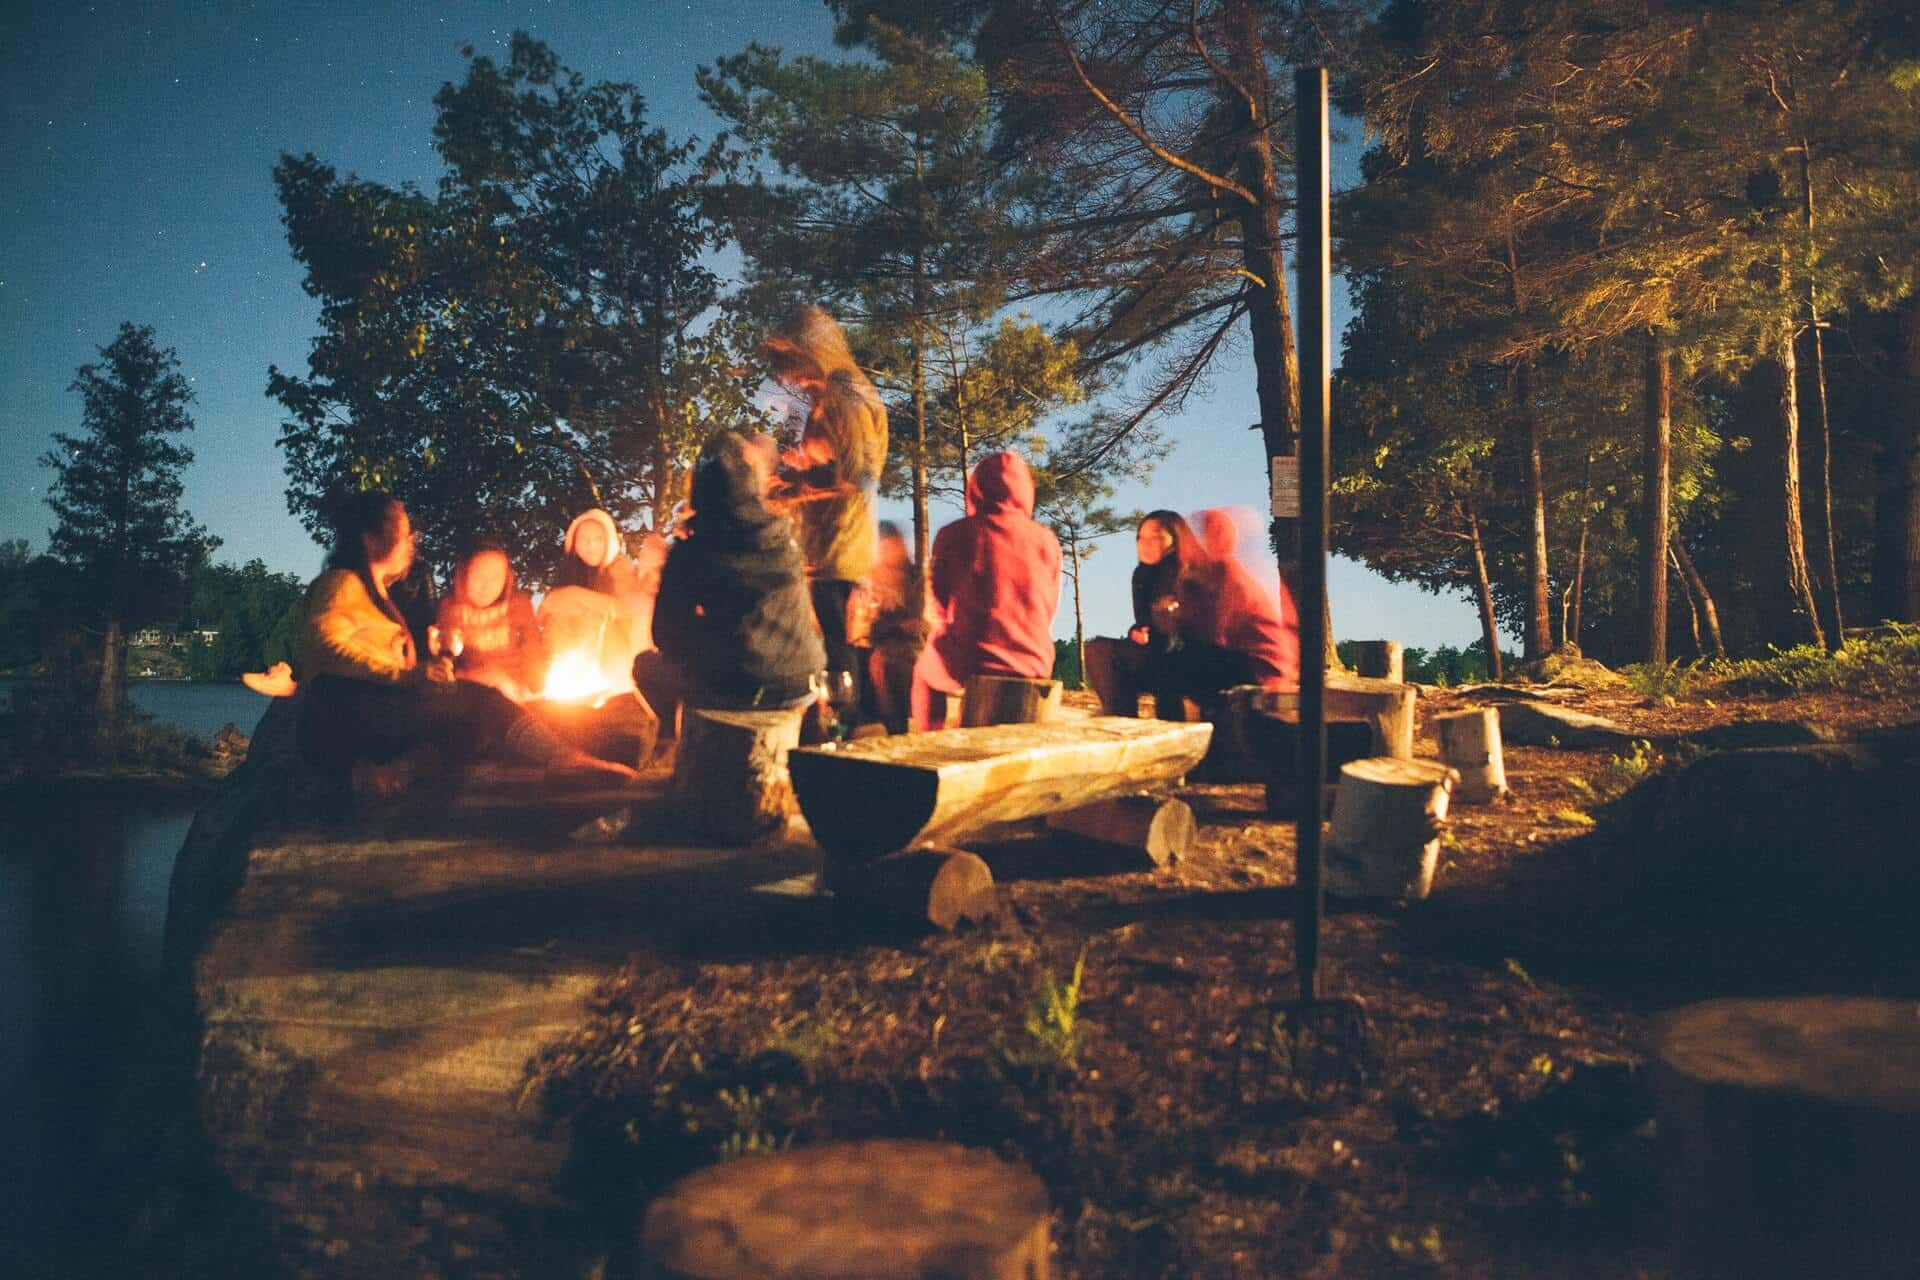 Family and friends sitting around a campfire